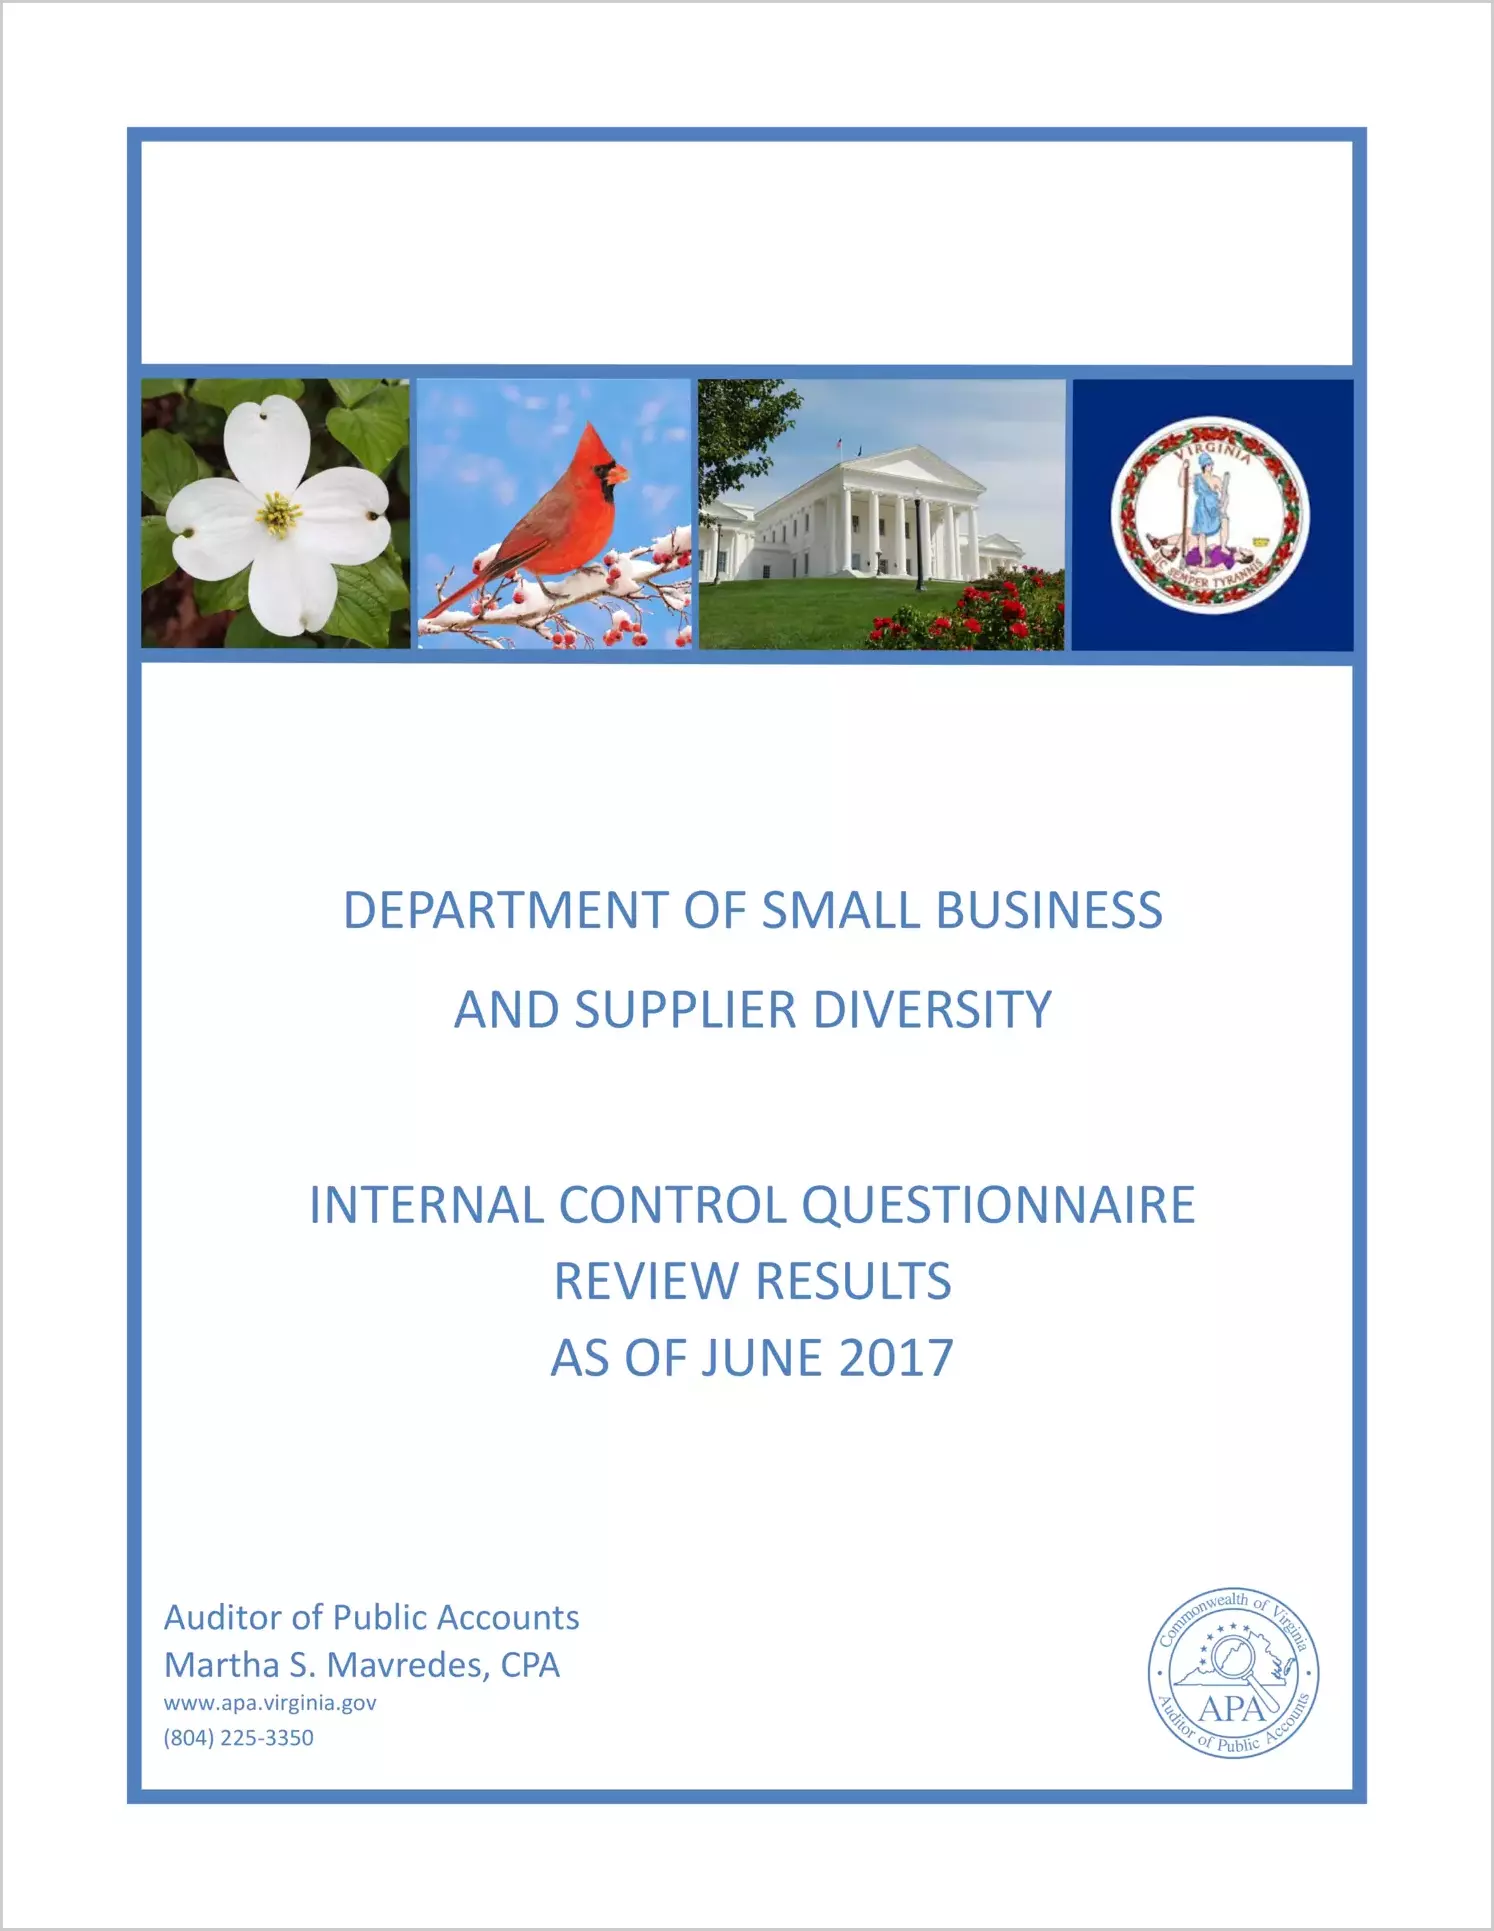 Department of Small Business and Supplier Diversity Internal Control Questionnaire Review Results as of June 2017